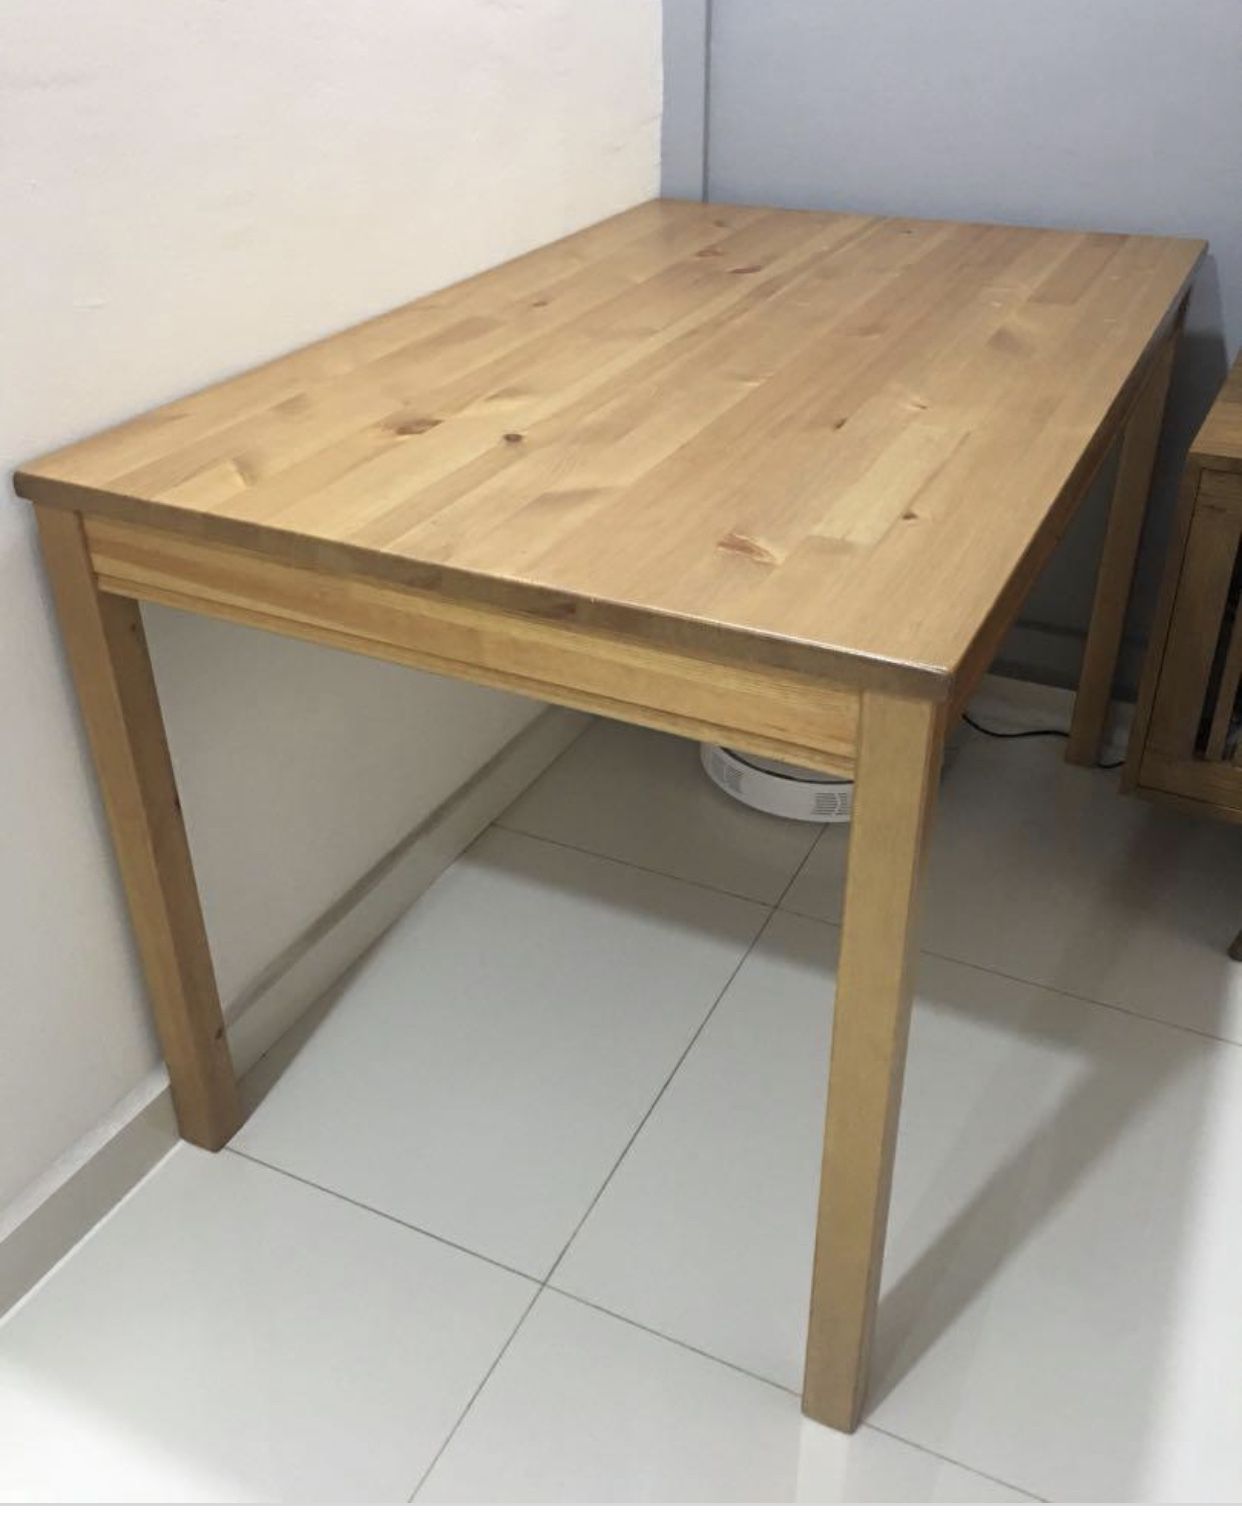 Moving sale wooden table Without chairs. $50